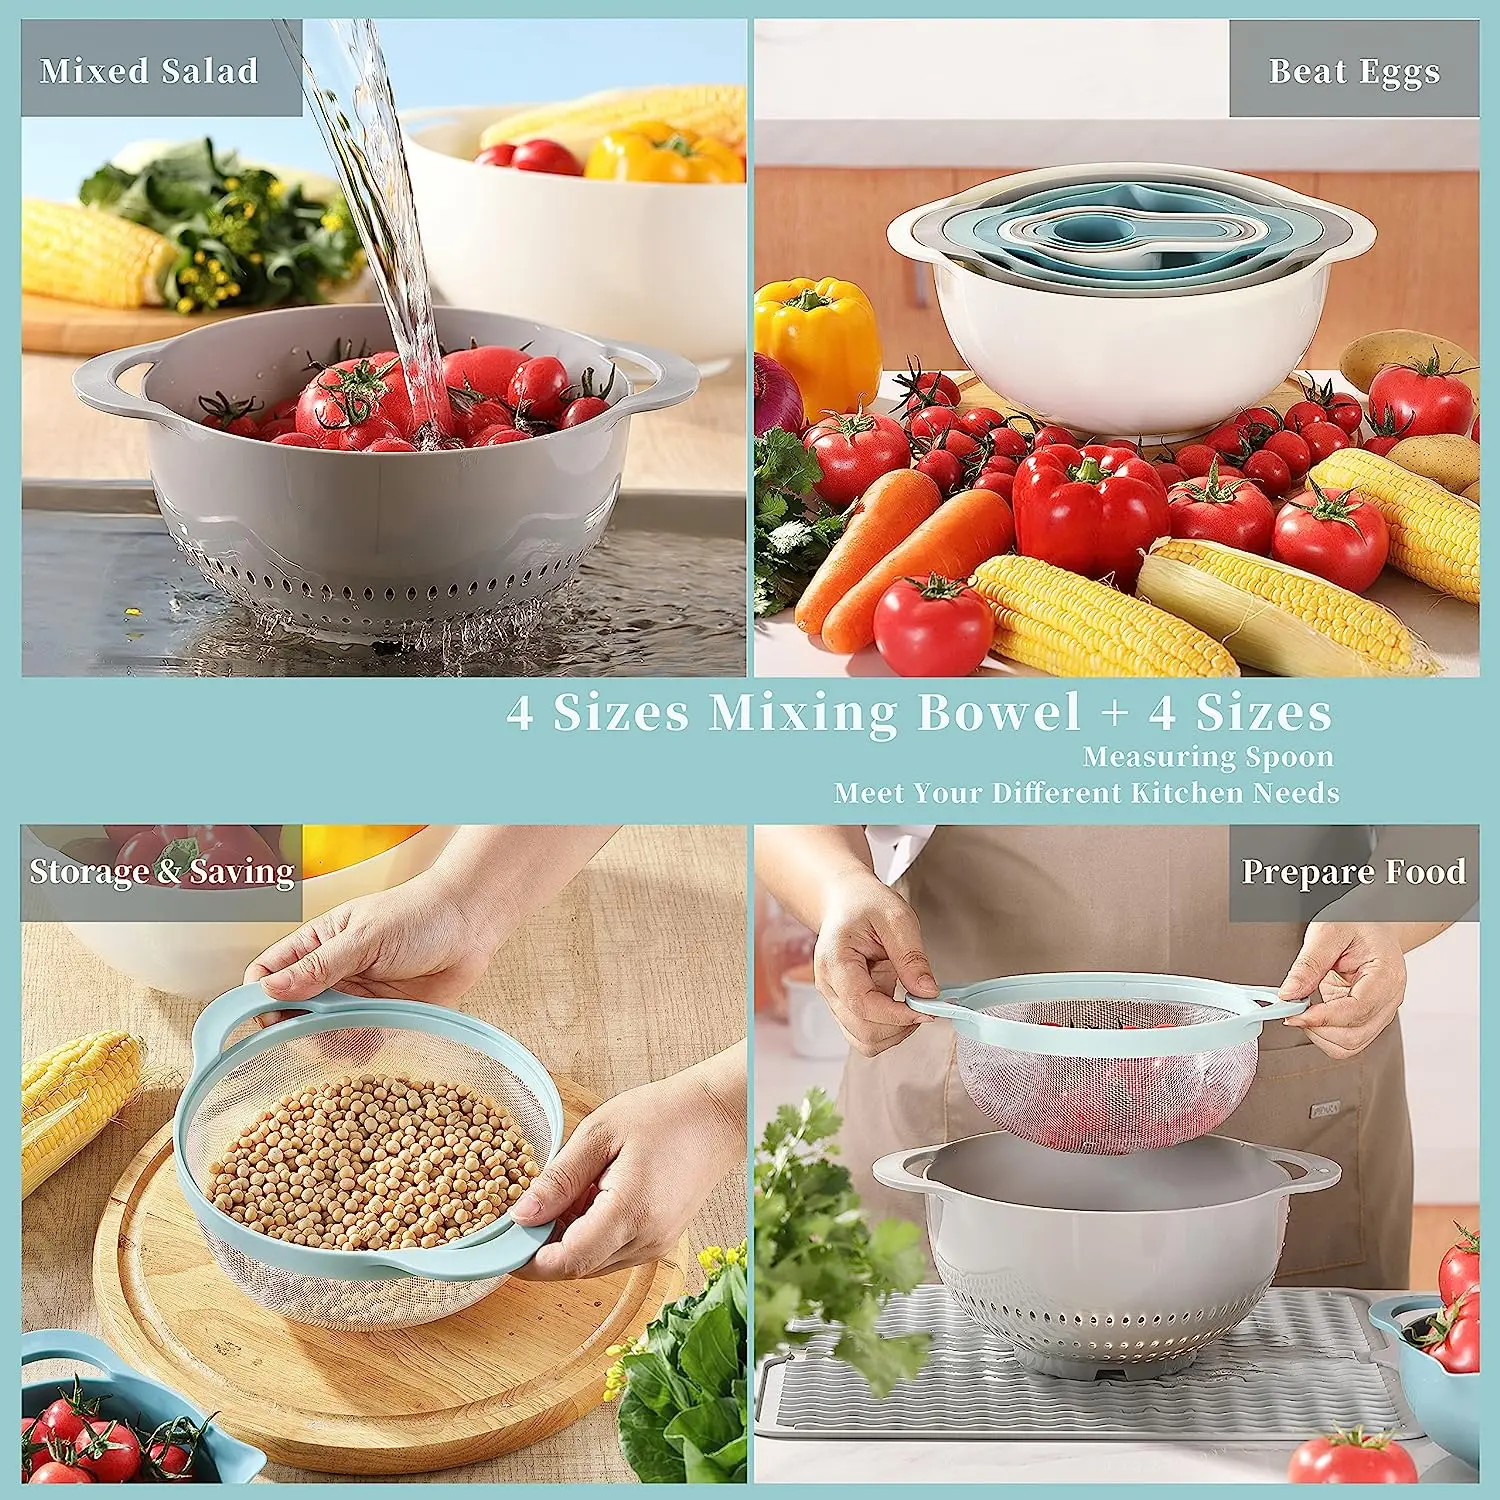 https://ae01.alicdn.com/kf/S4316d07c5a364a509a8d17fd857aa49cq/8PCS-Plastic-Mixing-Bowl-Set-includes-2-Mixing-Bowl-1-Colander-1-Sifter-and-4-Measuring.jpg